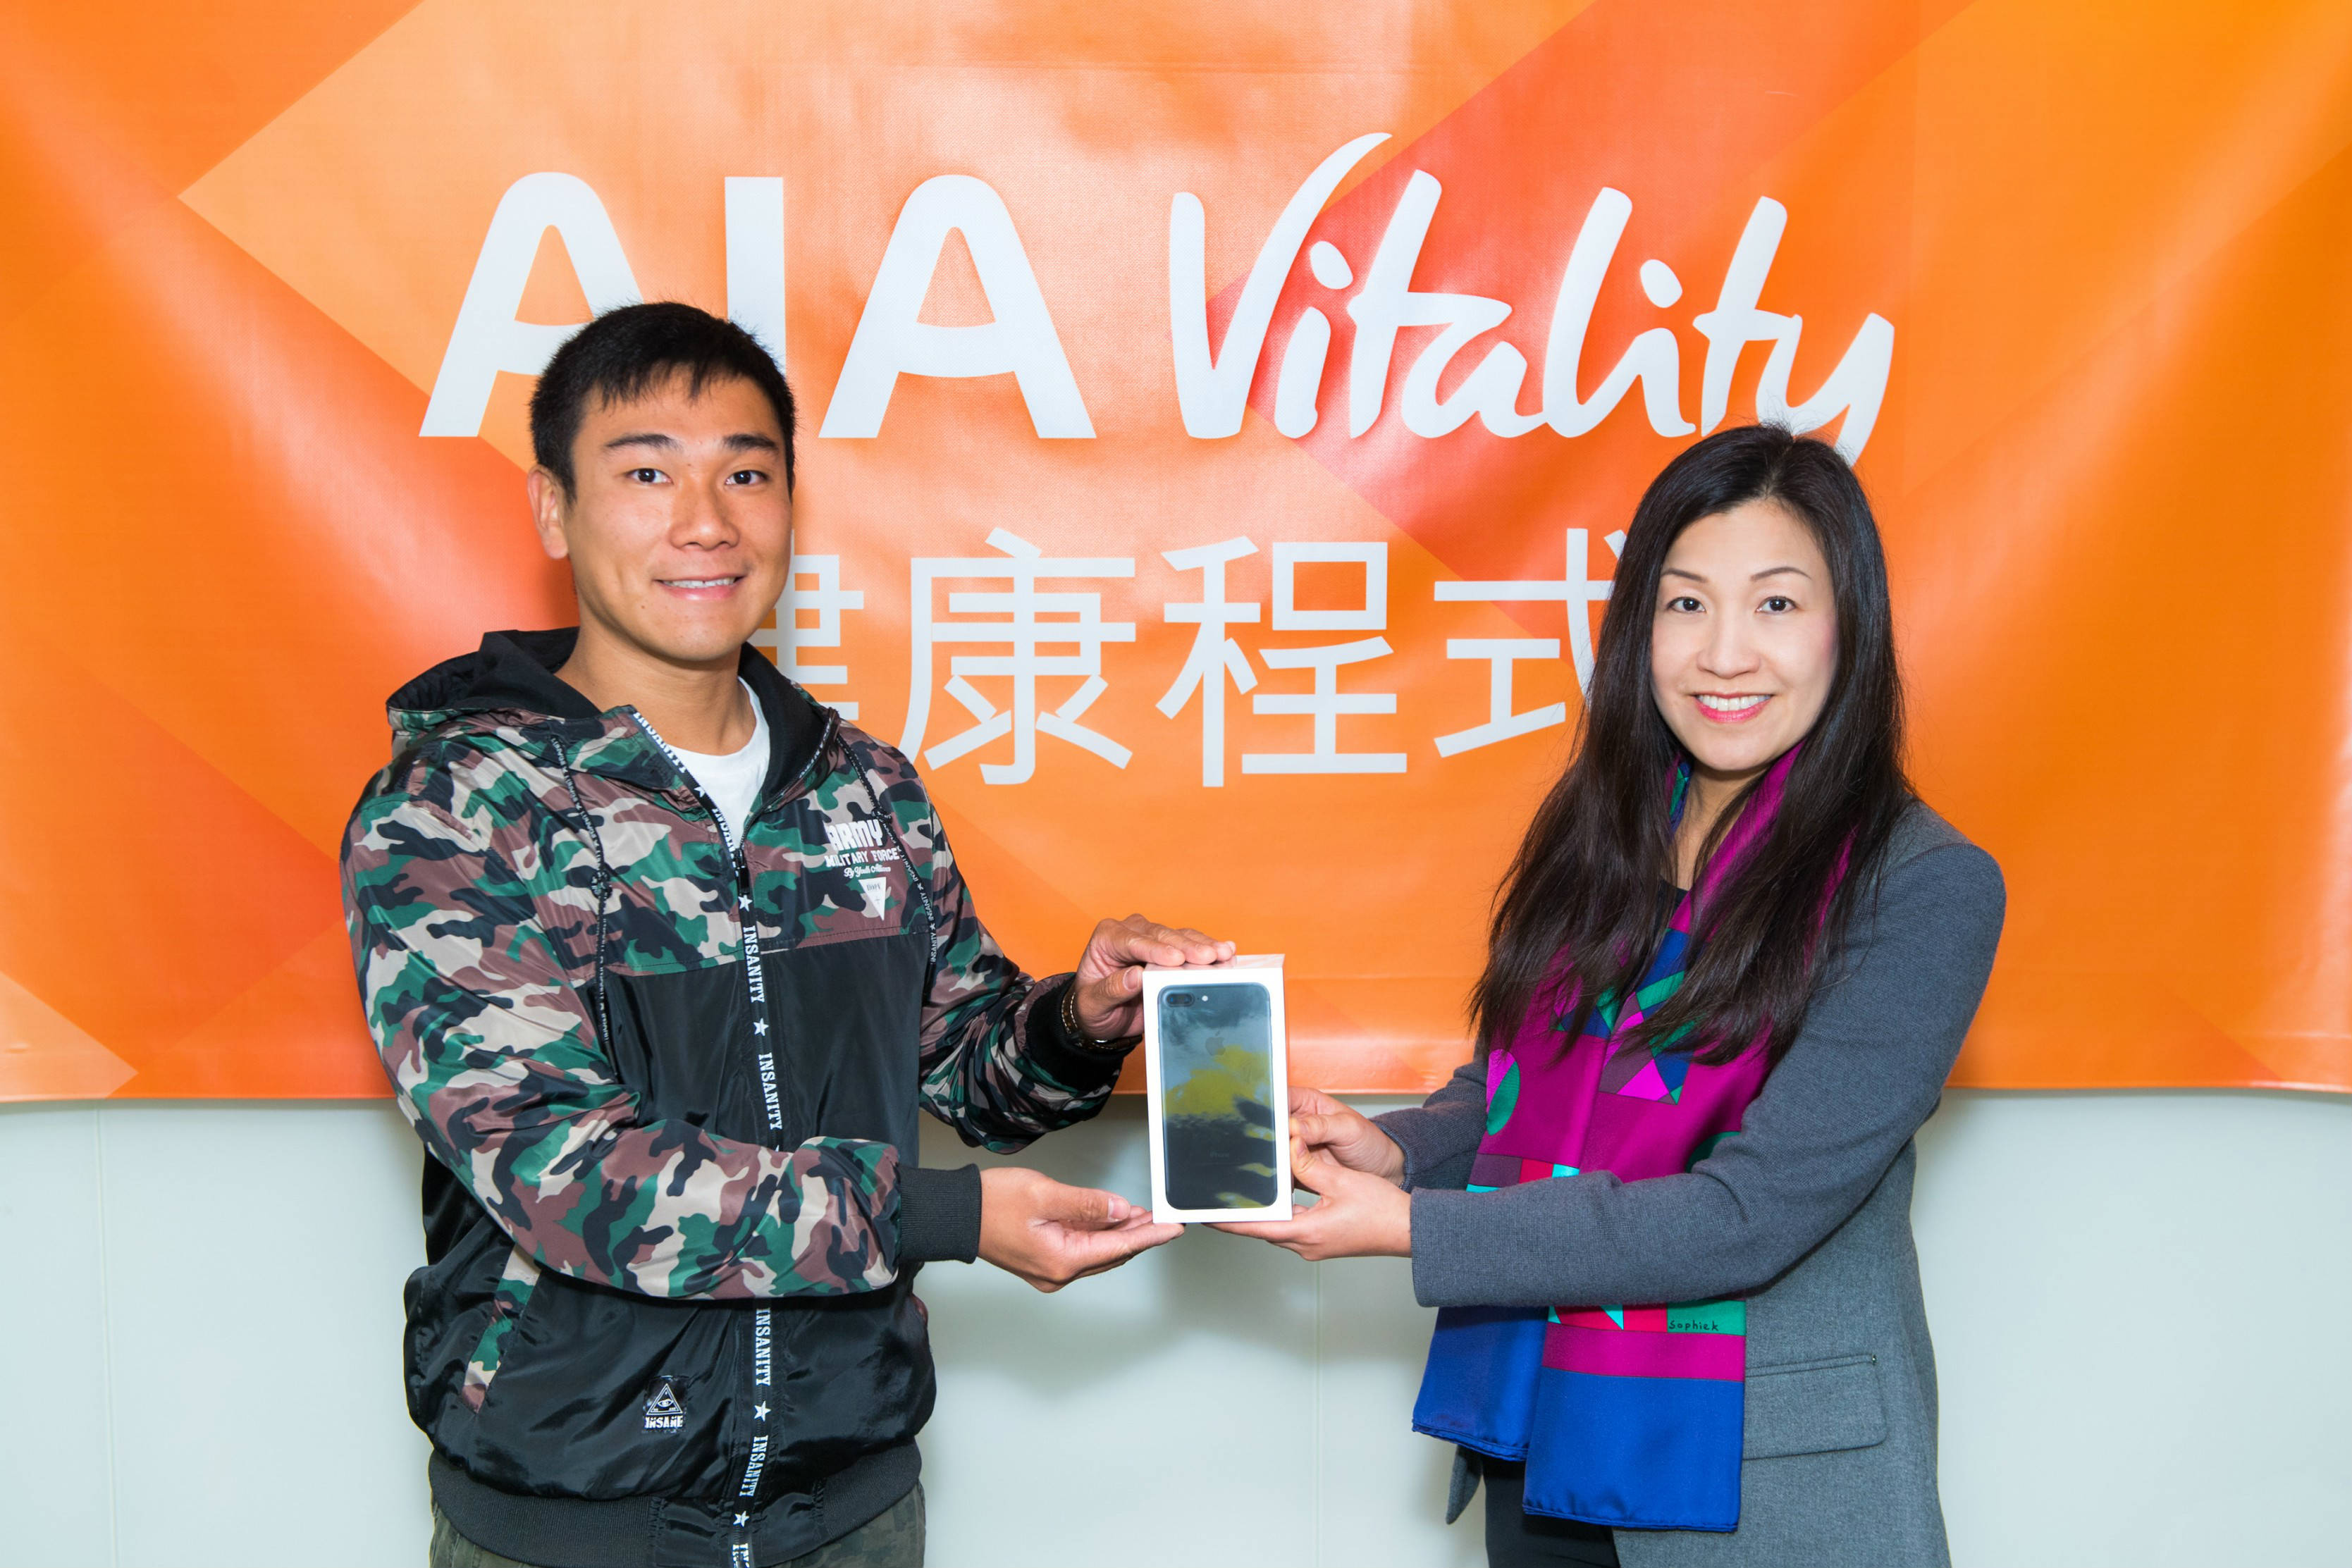 Ms Bonnie Tse, General Manager, Business Strategy and Marketing of AIA Hong Kong & Macau (right) presents the latest smartphones to the two winners of the first week's AIA Vitality Weekly Challenge Lucky Draw.